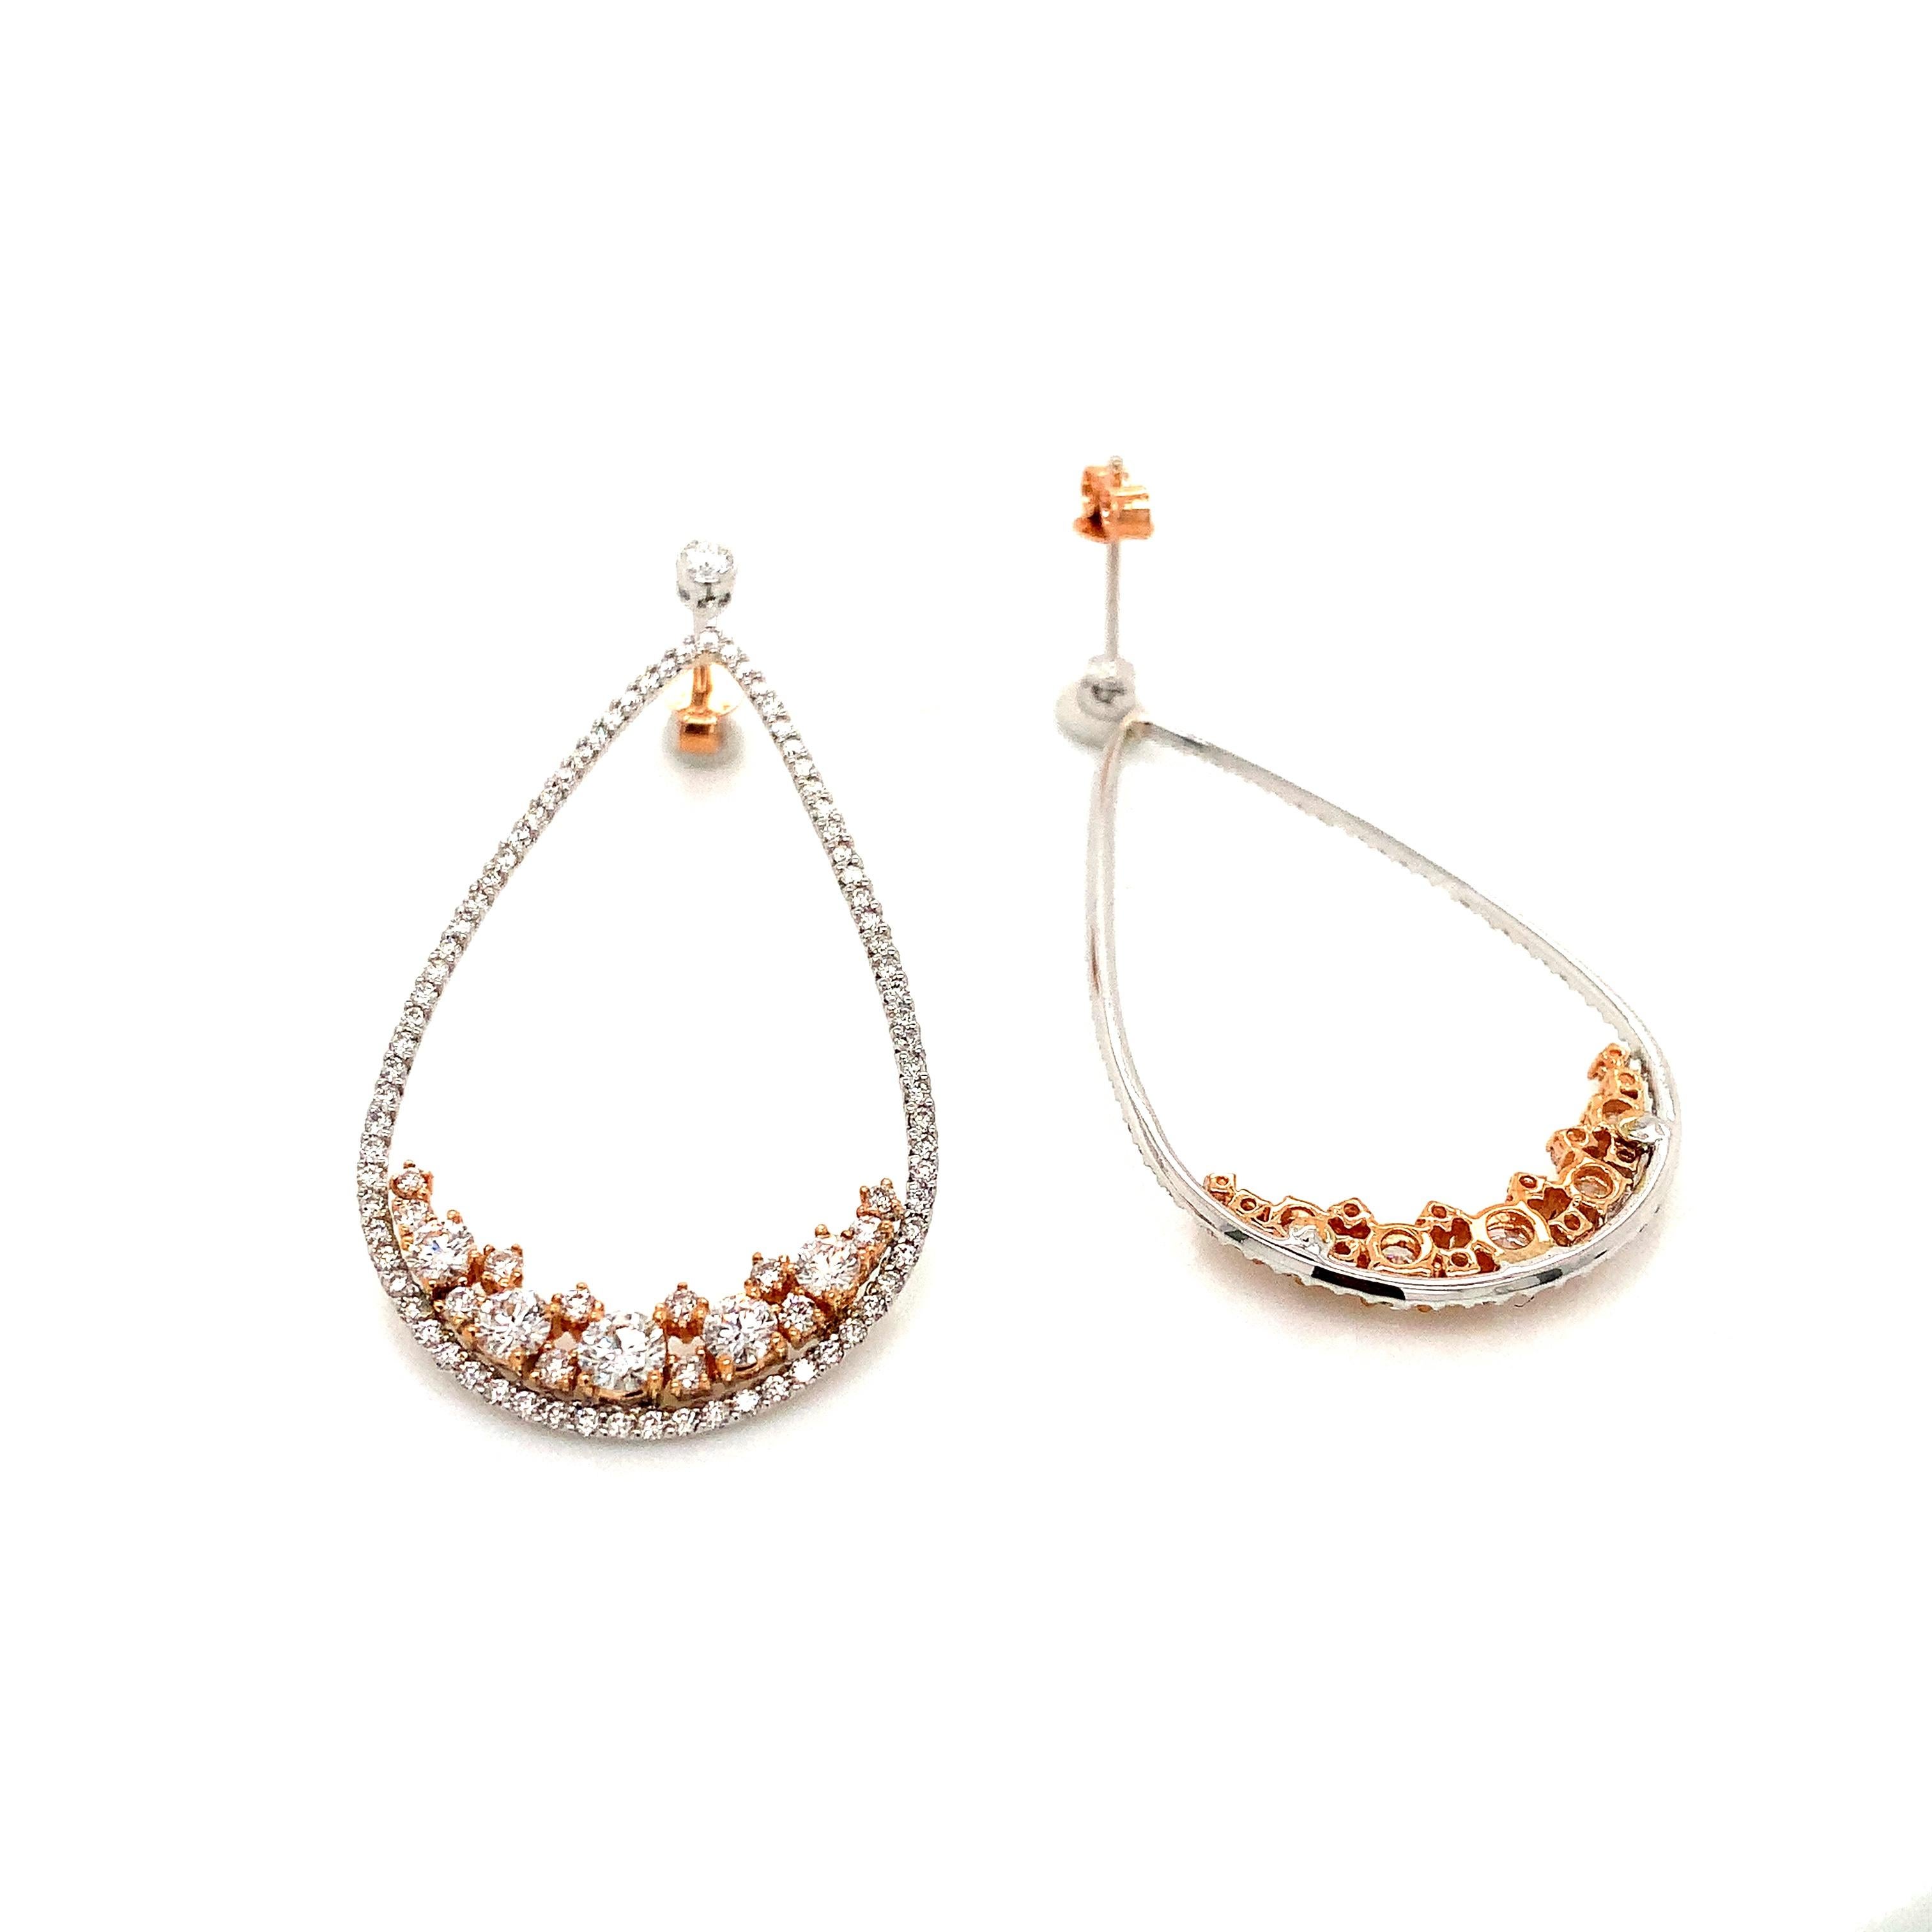 OWN Your Story 18K White and Rose Gold Brilliant Diamond Pendulum Drop Earrings

OWN Your Story brings its 3 generations of family tradition and unparalleled experience with 18K gold, diamonds, and gemstones to create high-level jewelry handcrafted